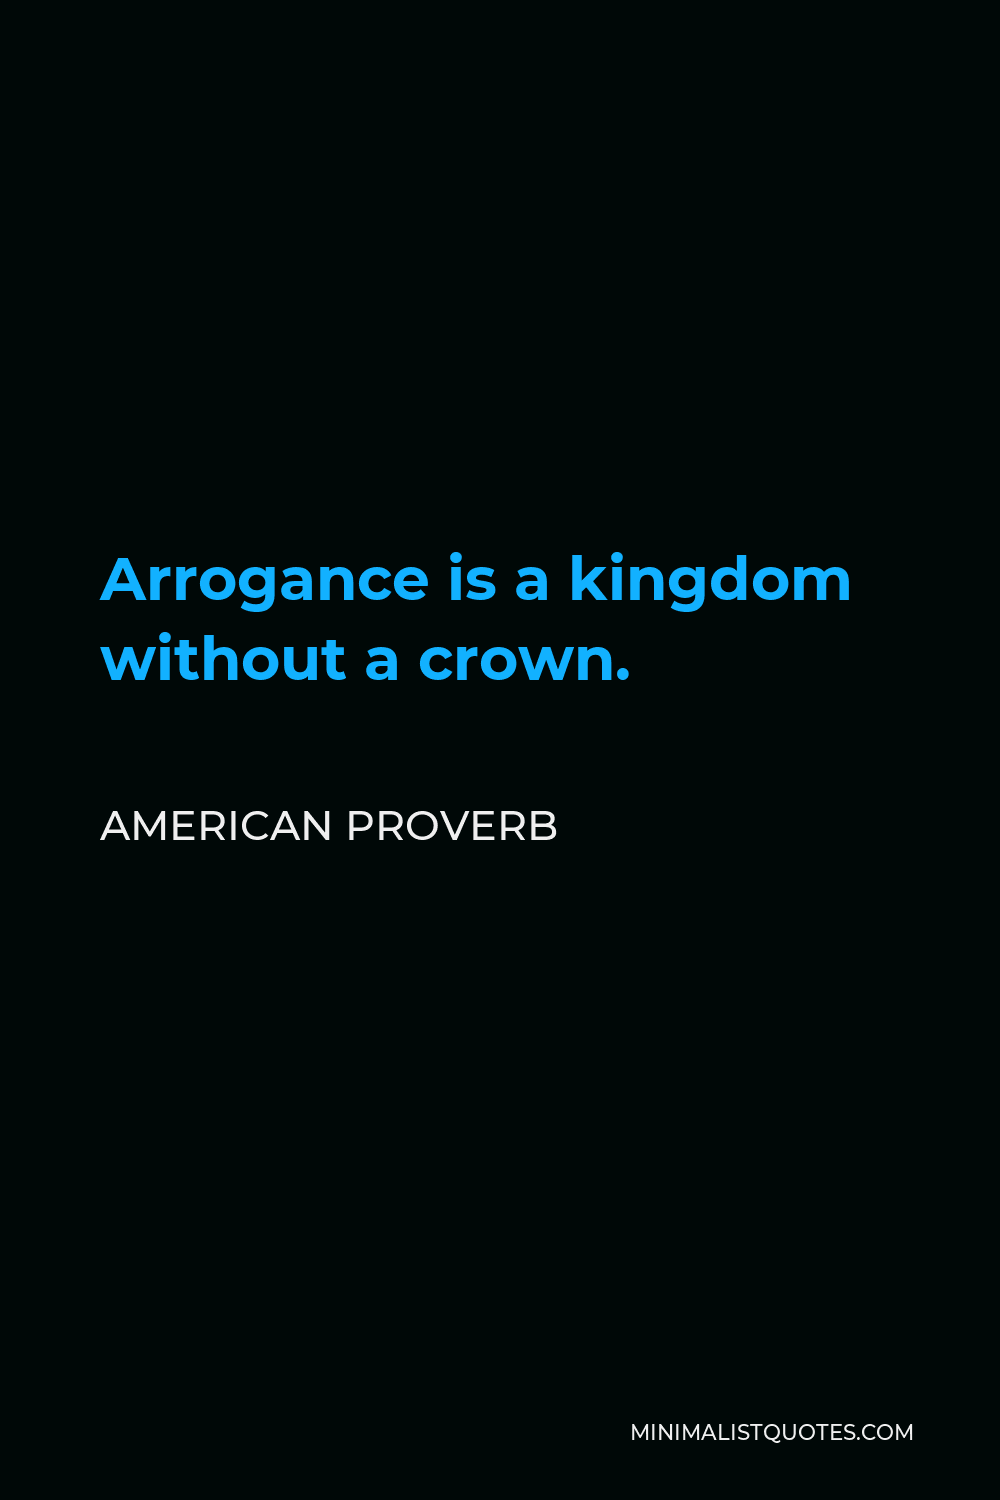 American Proverb Quote - Arrogance is a kingdom without a crown.